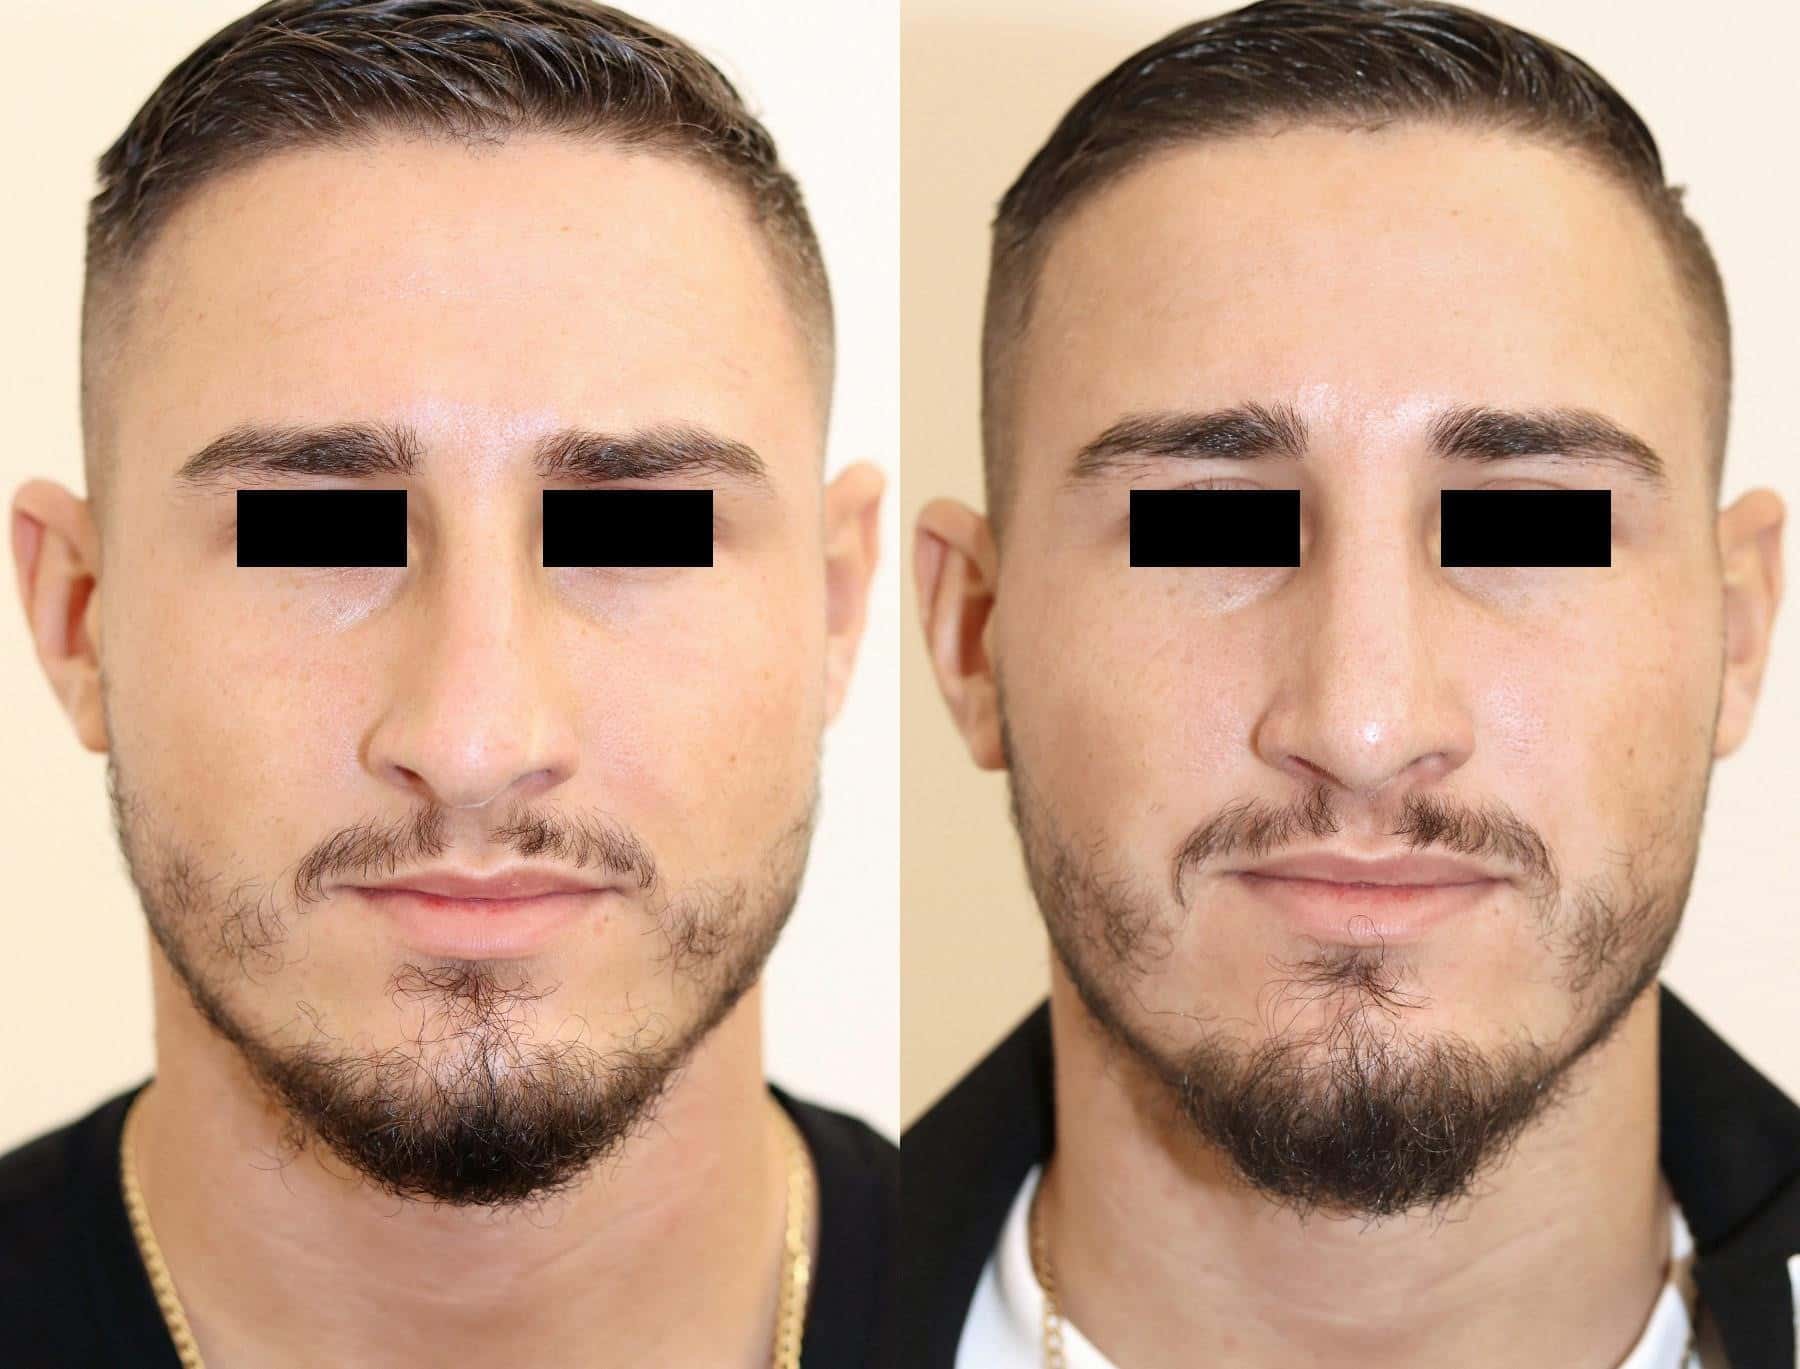 Male face, before and after Nose Jobs treatment, front view, patient 7